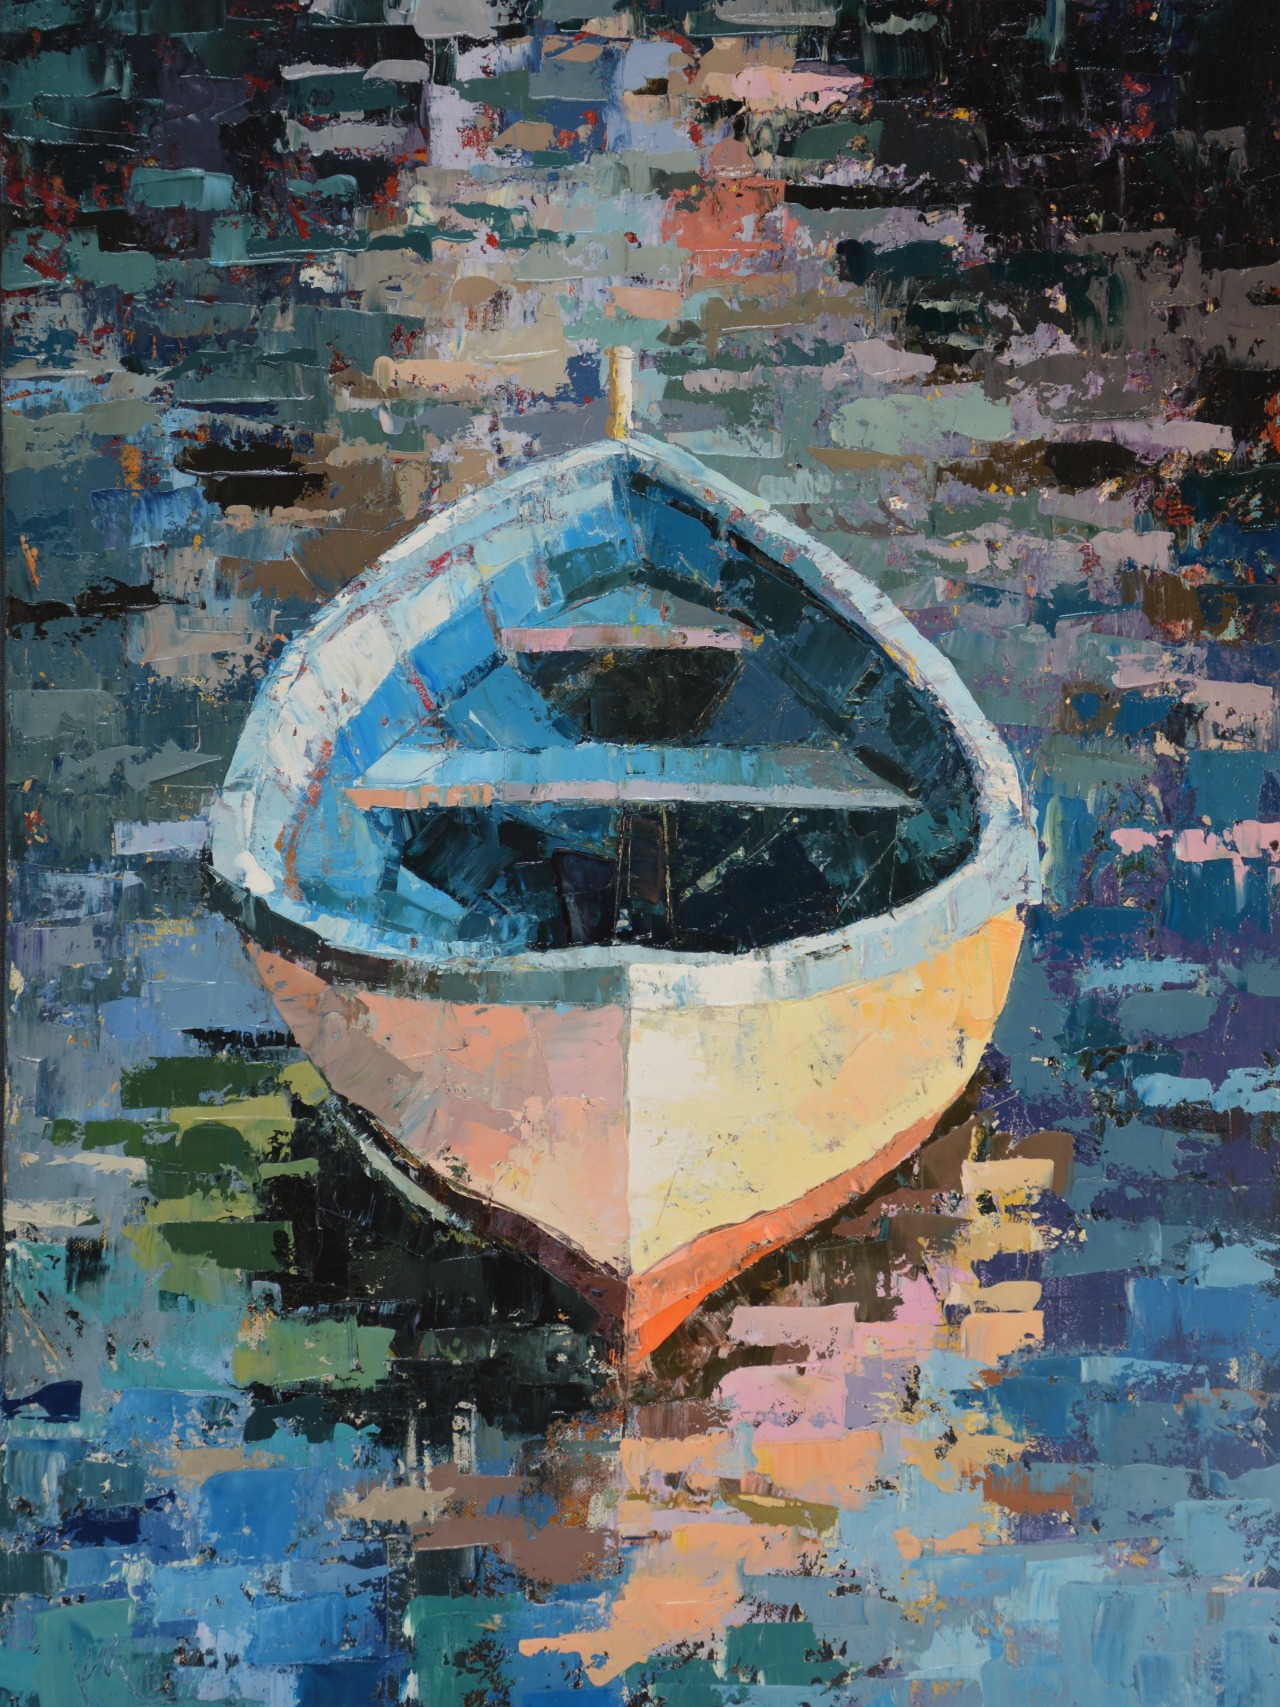 kkmcaninch:
“ Sold and off to New Jersey BOAT/18 24” x 18” oil on .75” stretched canvas
”